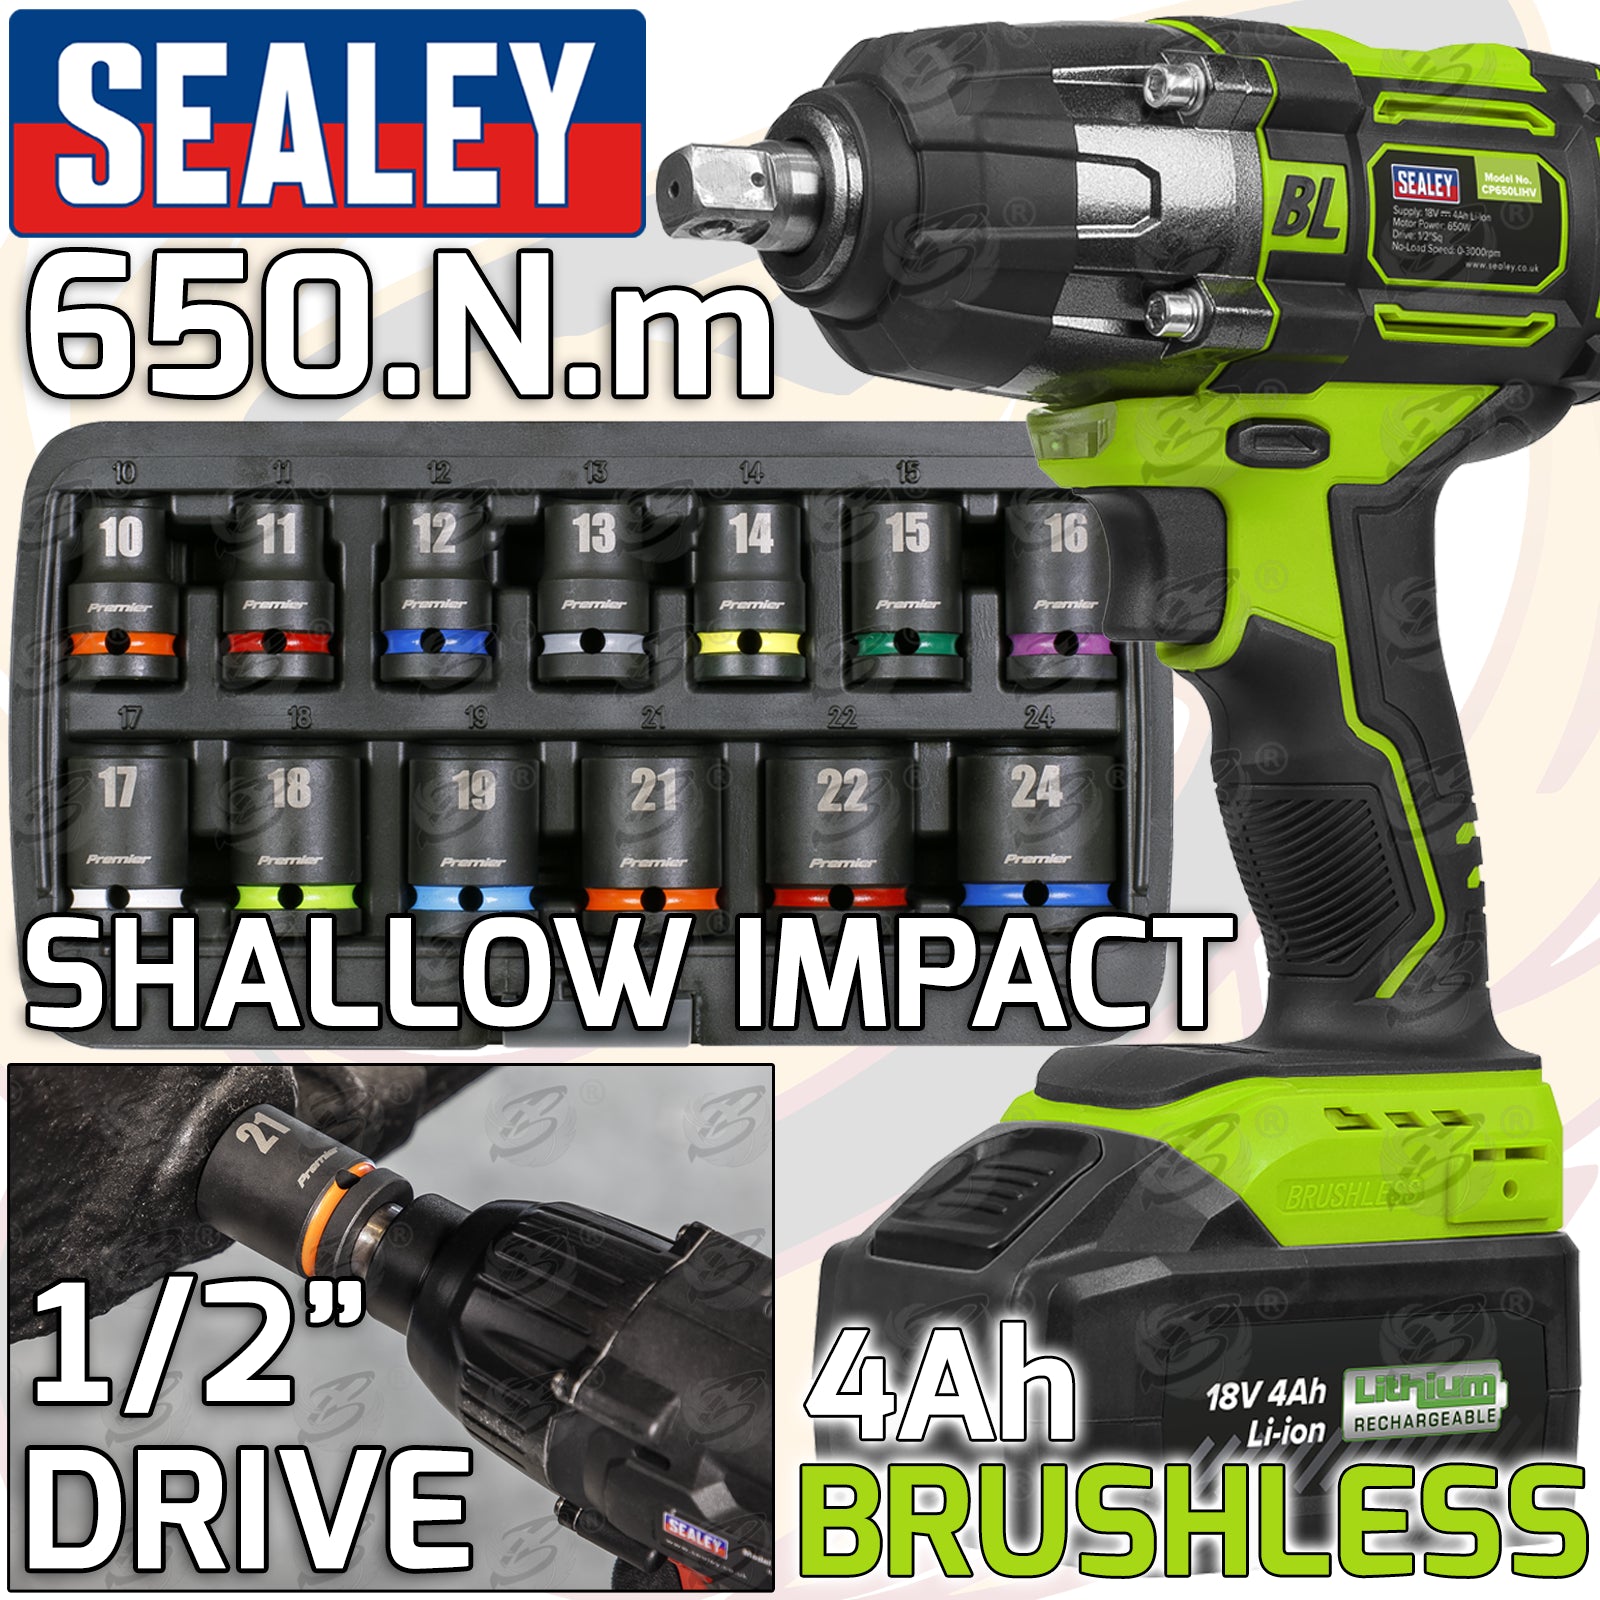 SEALEY 18V 4Ah 1/2" DRIVE BRUSHLESS CORDLESS IMPACT WRENCH 650Nm & 13PCS 6 POINT SHALLOW IMPACT SOCKETS 10MM - 24MM